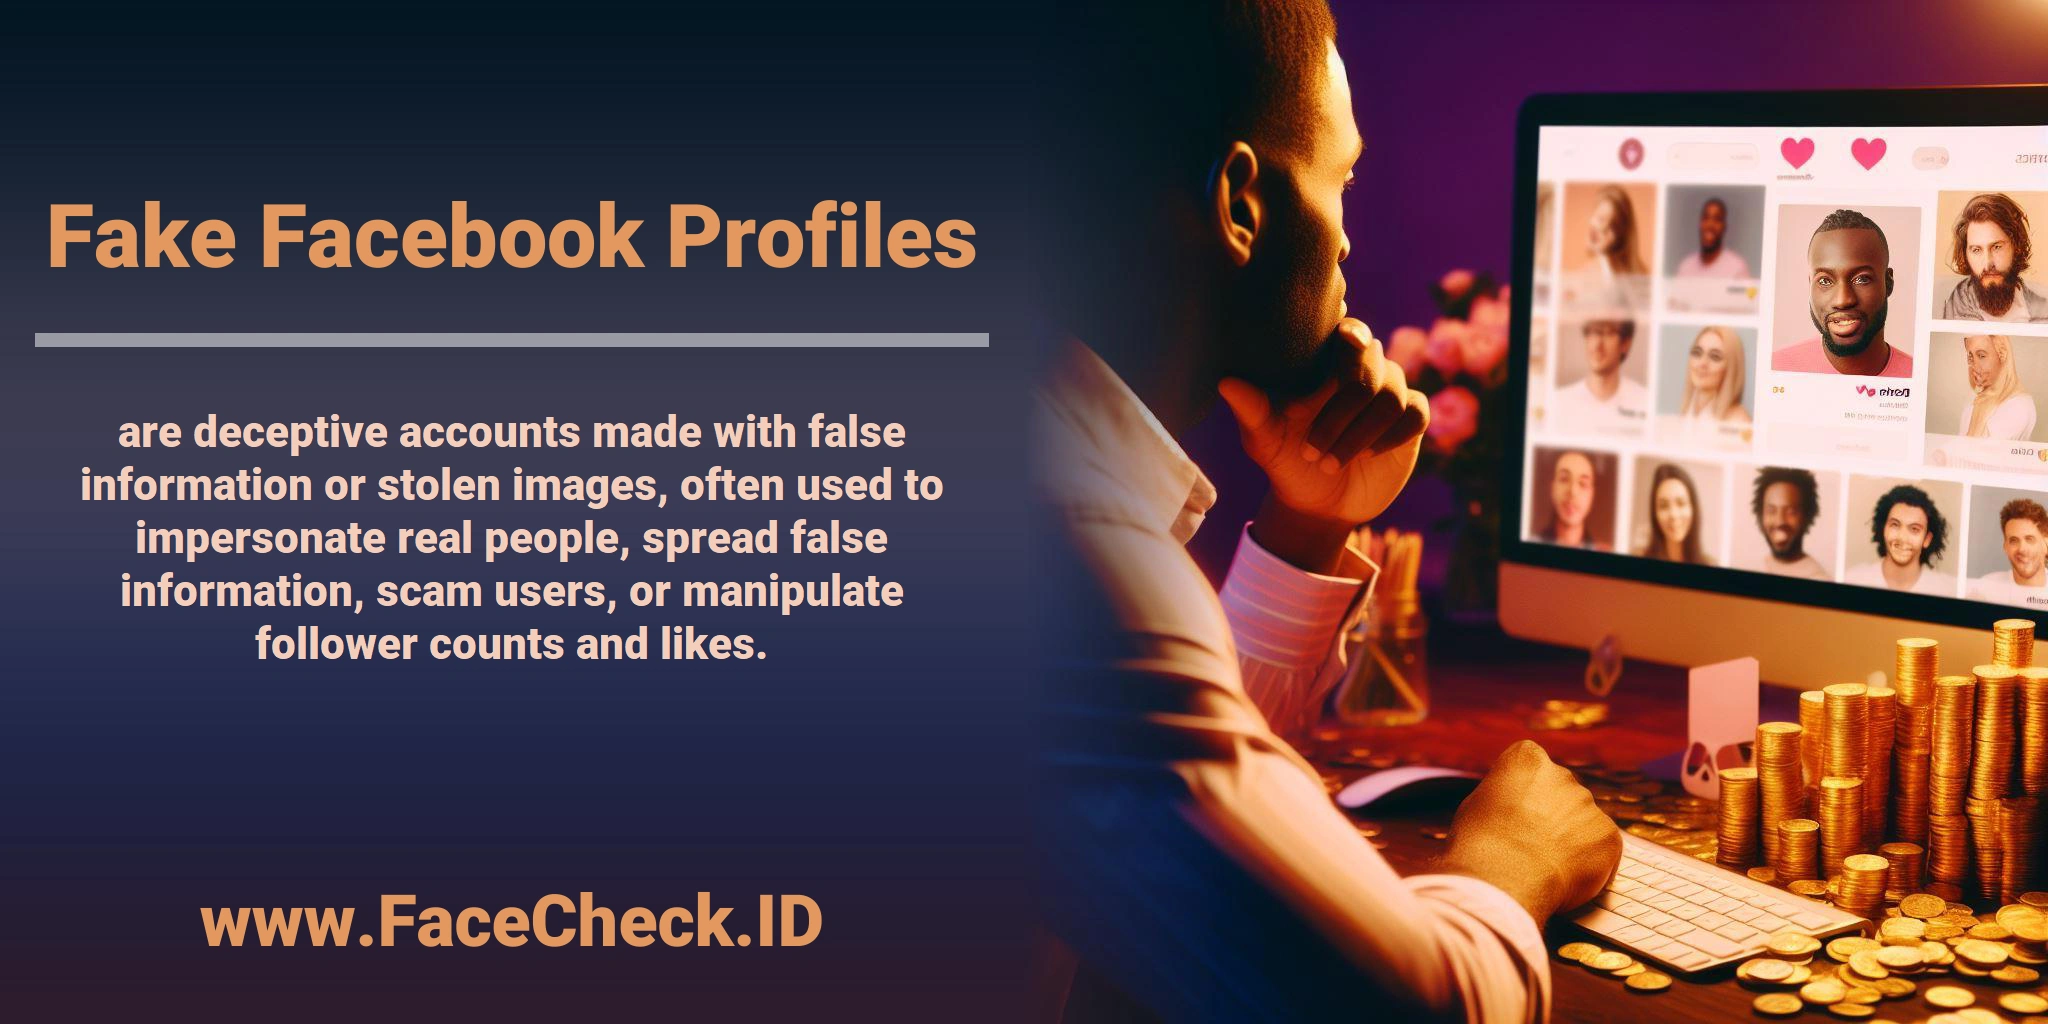 <b>Fake Facebook Profiles</b> are deceptive accounts made with false information or stolen images, often used to impersonate real people, spread false information, scam users, or manipulate follower counts and likes.